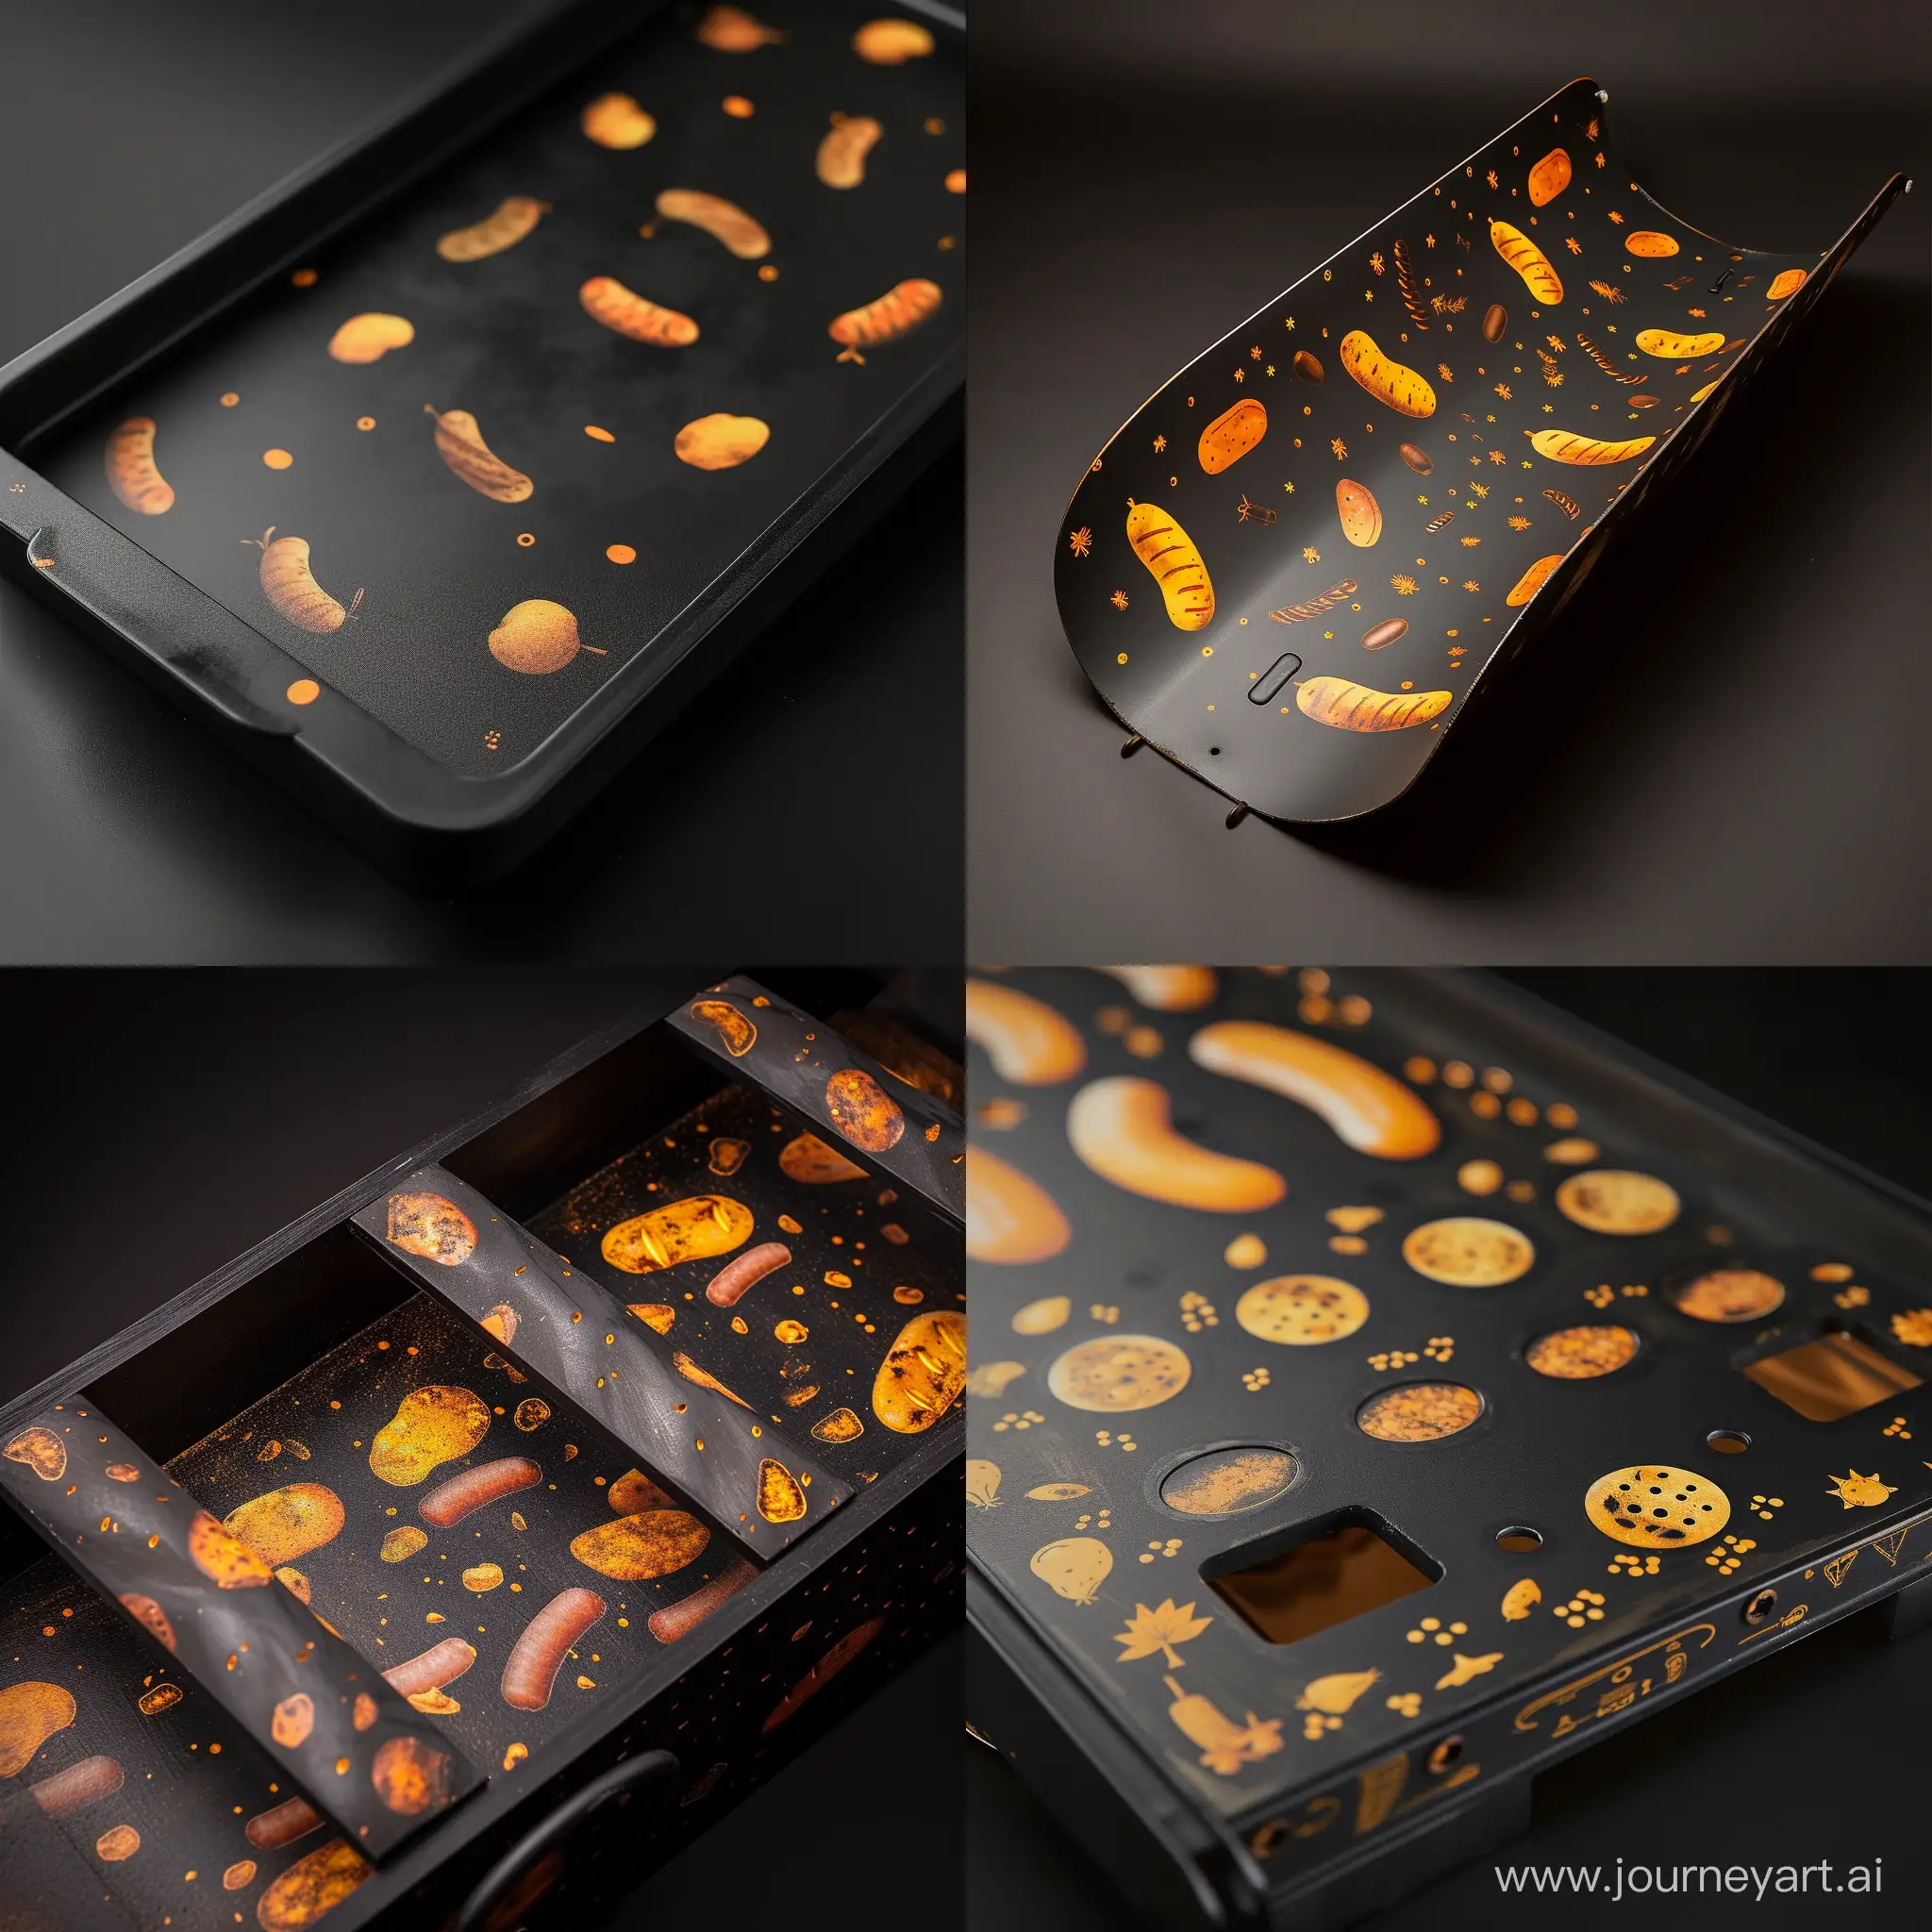 An empty potato hopper with a design on it with a beautiful matte black background. Small pictures of sausages and potatoes are designed on it in yellow and orange colors.